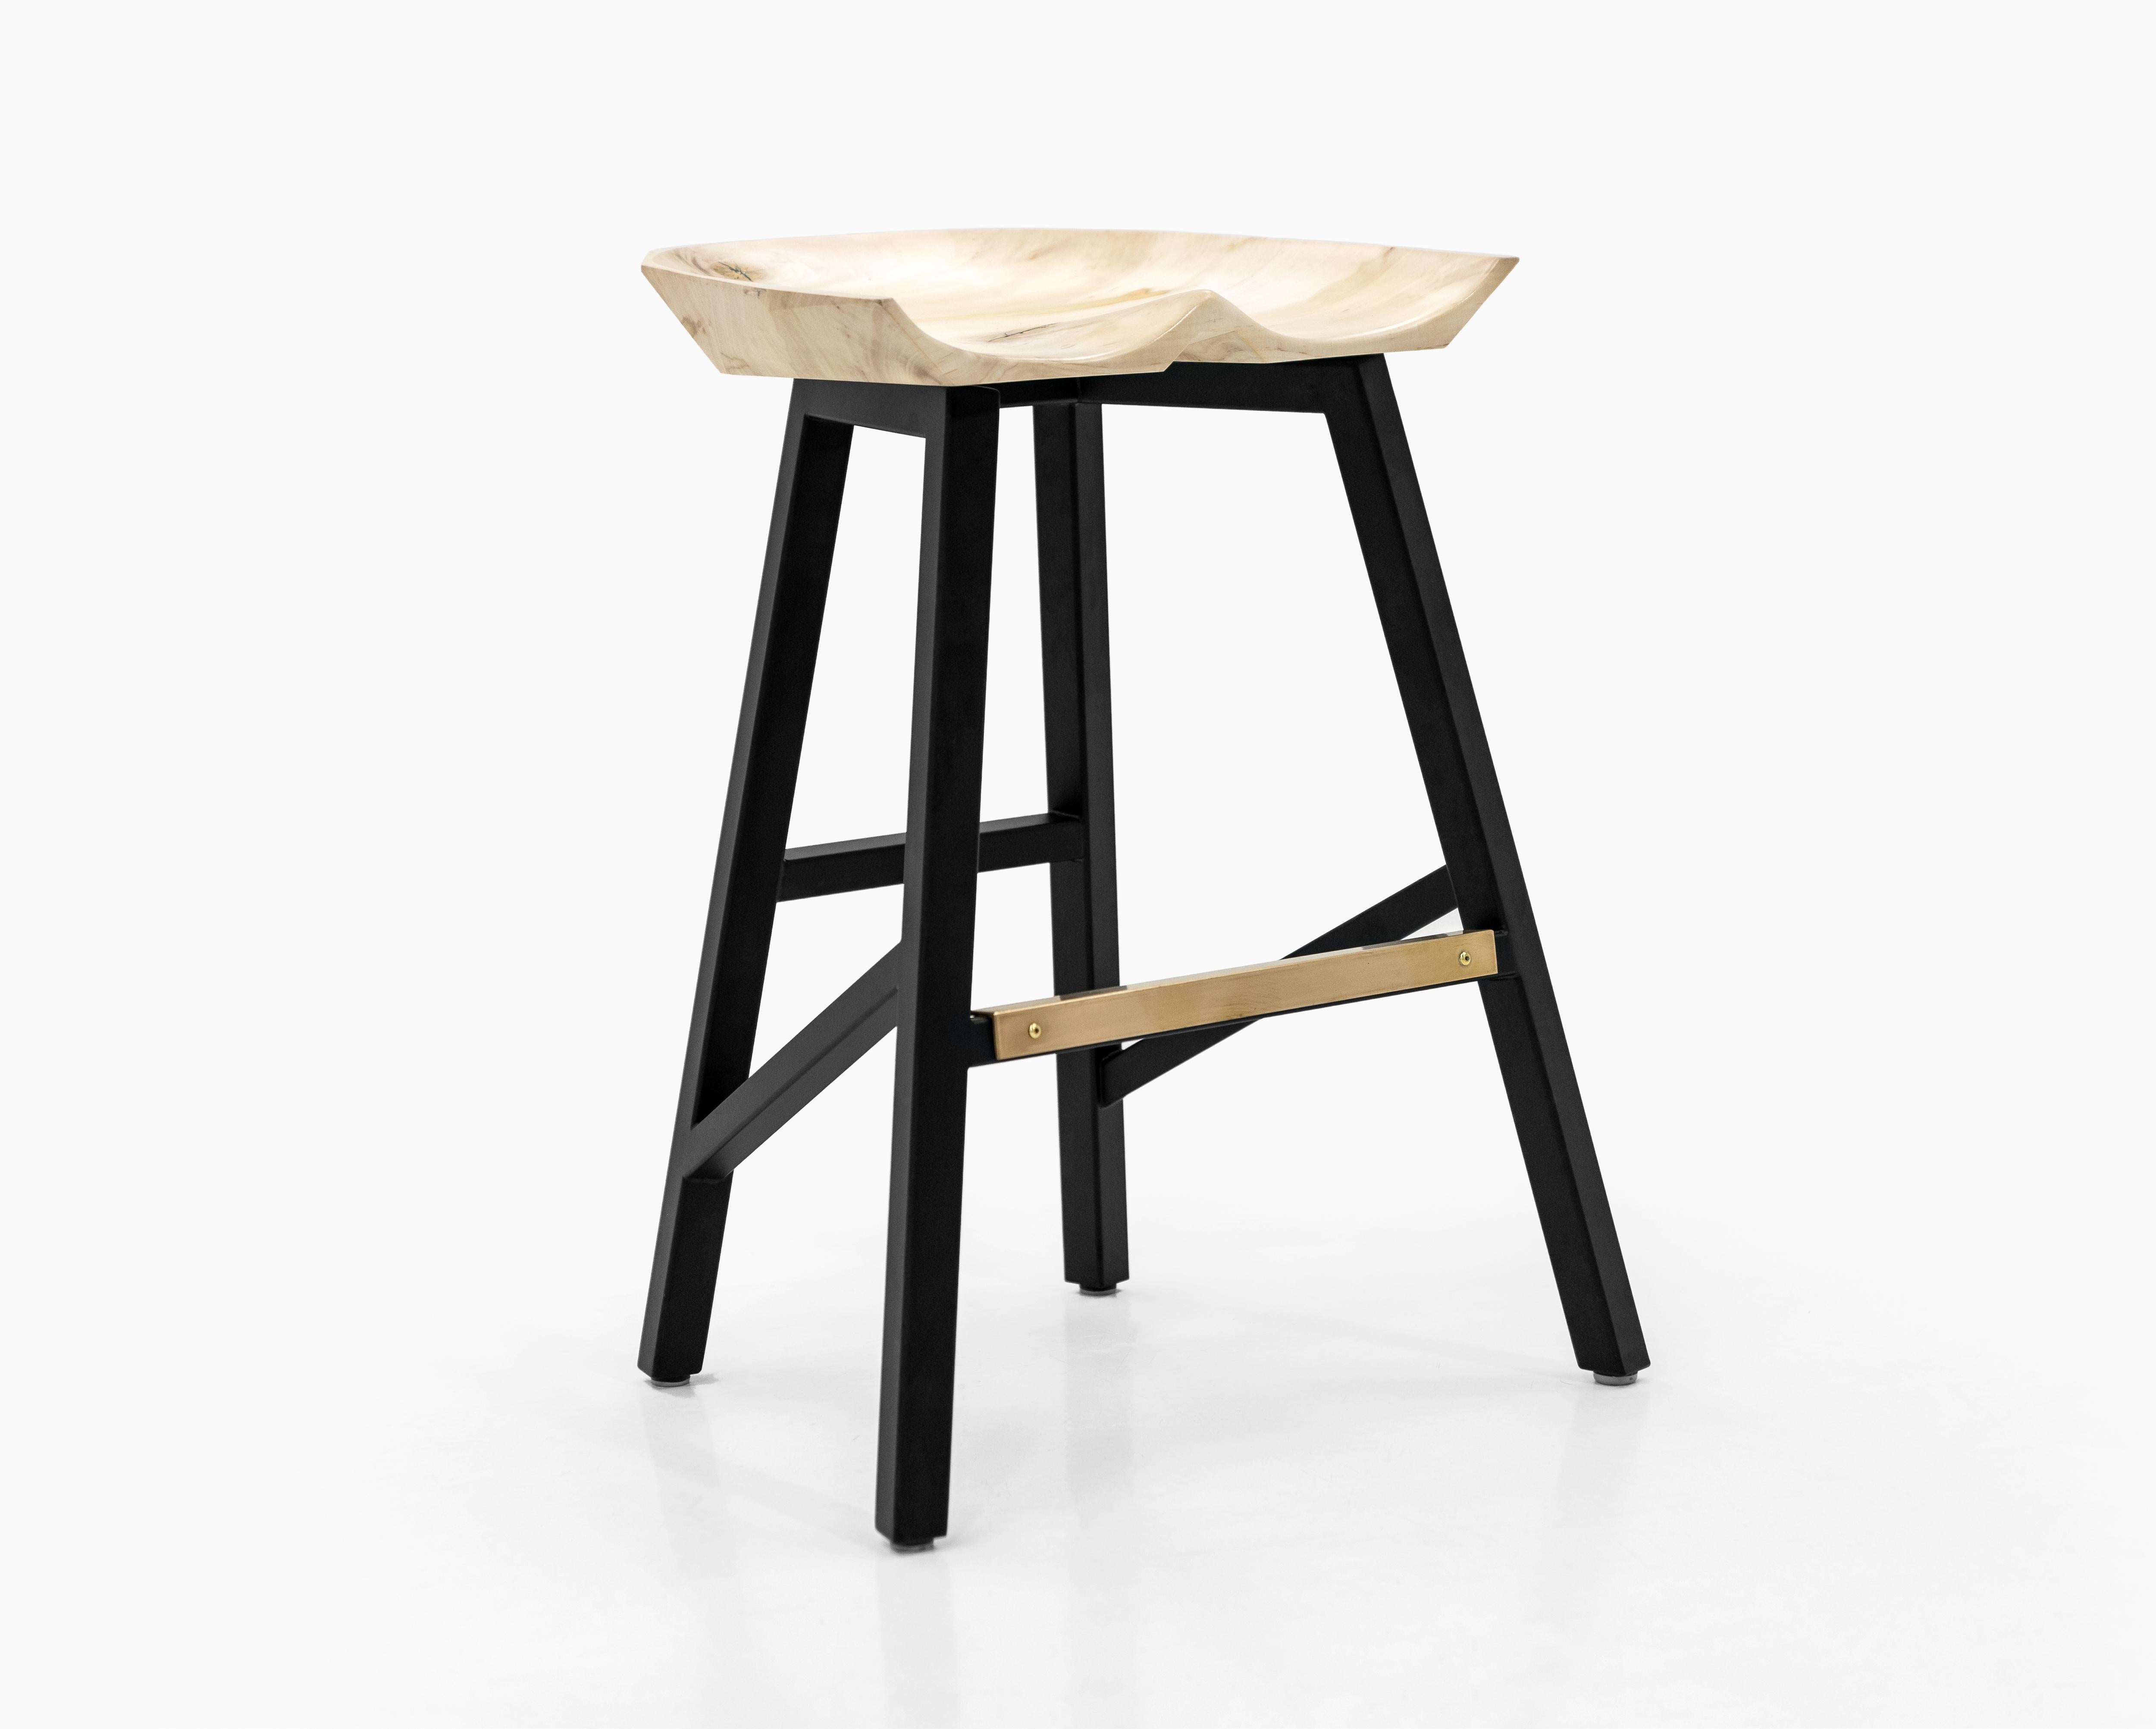 Modern tractor-seat style bar and counter stool. Shown in bleached soft maple with stainless steel legs (available in any powder-coated color) and brass kick plate. Available in 18